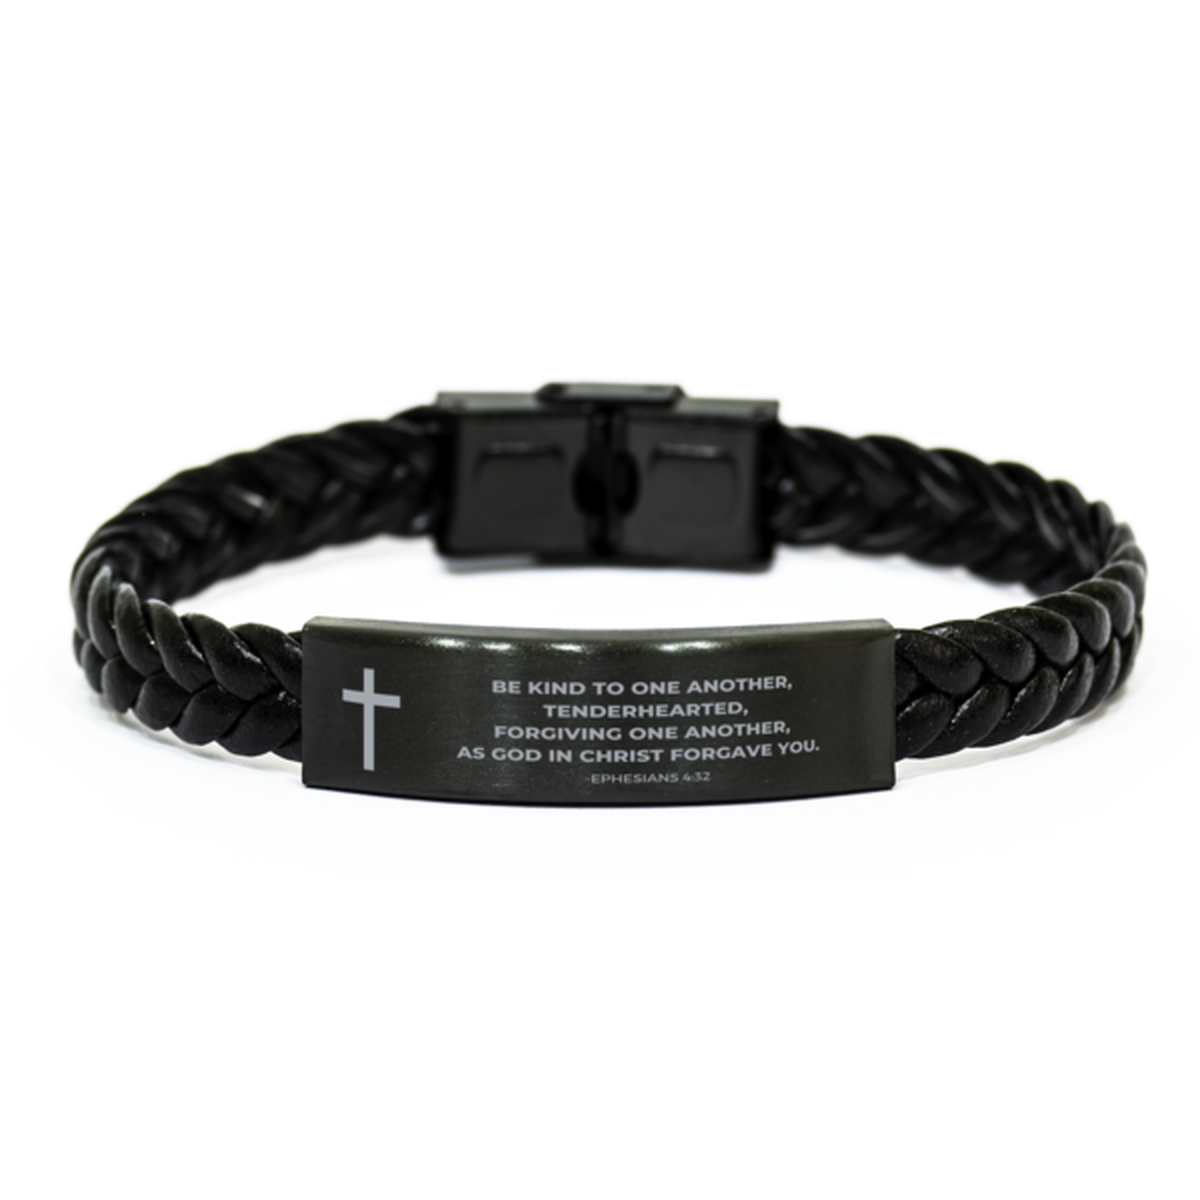 Baptism Gifts For Teenage Boys Girls, Christian Bible Verse Braided Leather Bracelet, Be kind to one another, Catholic Confirmation Gifts for Son, Godson, Grandson, Nephew